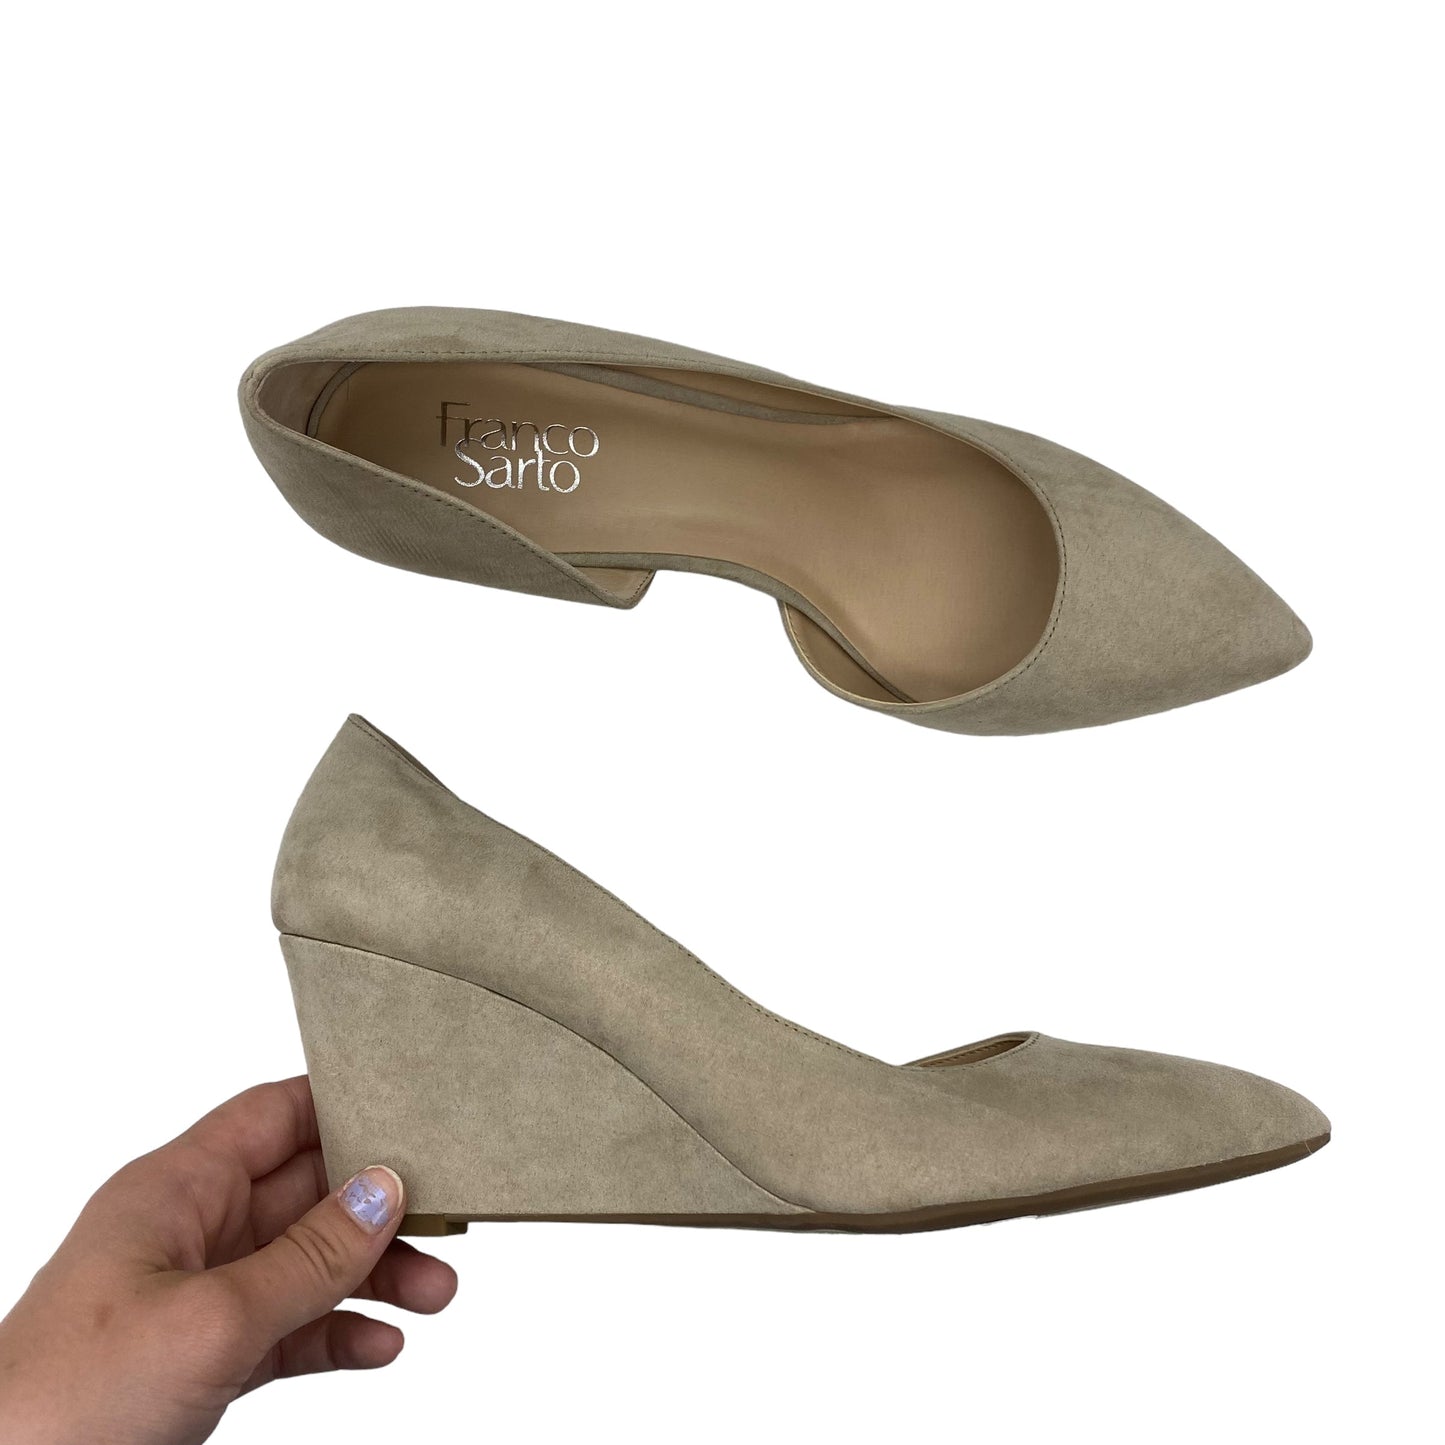 TAN SHOES HEELS WEDGE by FRANCO SARTO Size:10